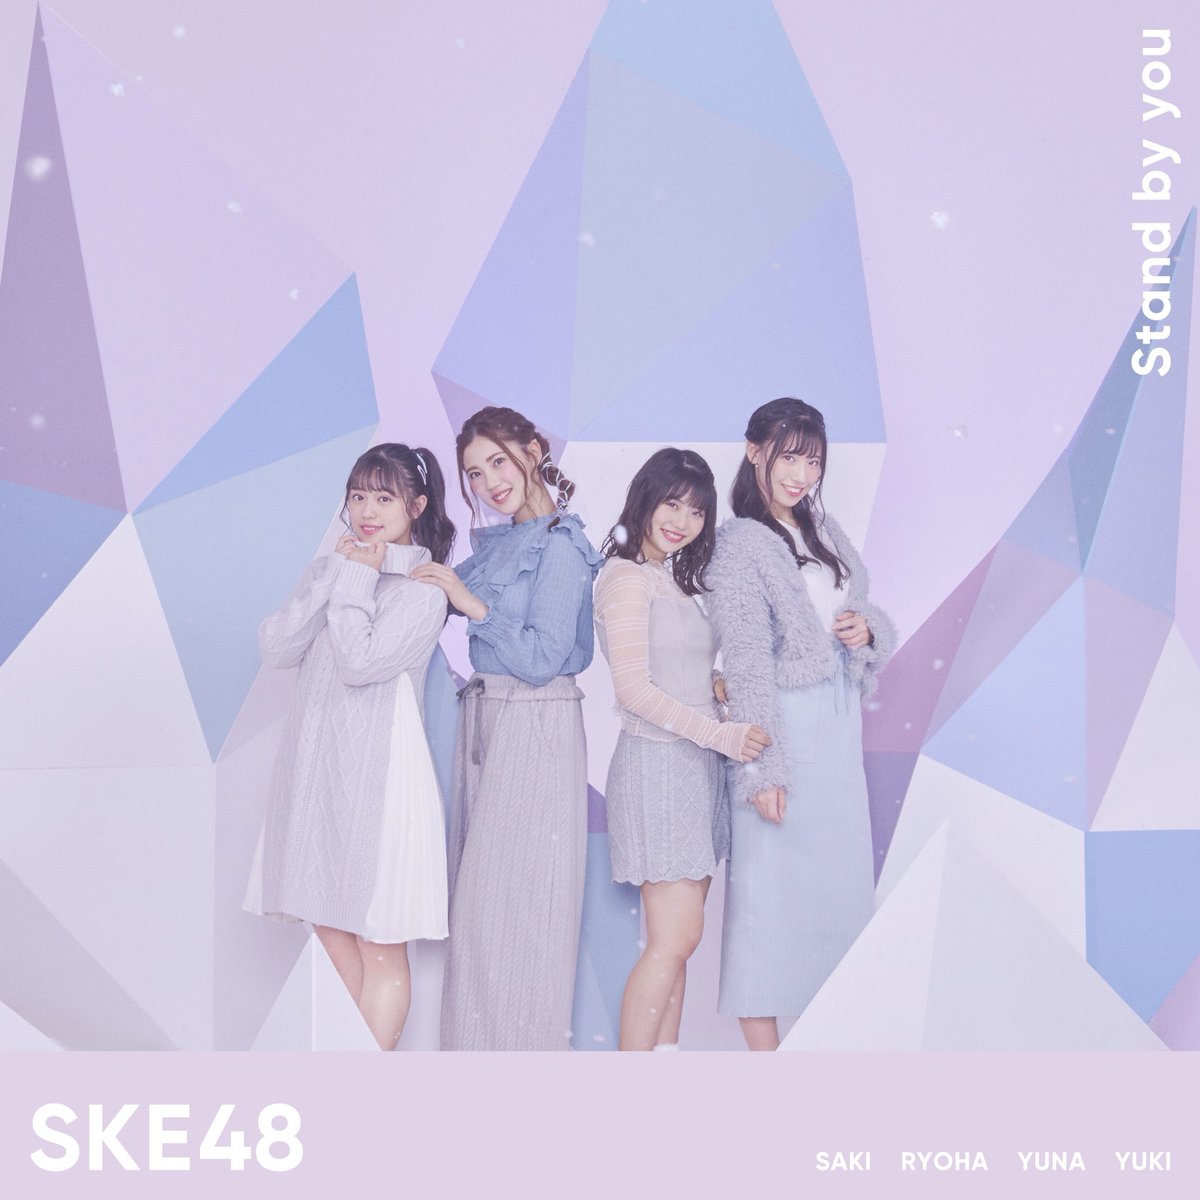 SKE48/24thシングル「Stand by you」(CD+DVD)【初回限定盤 TYPE-D】 ラムタラ